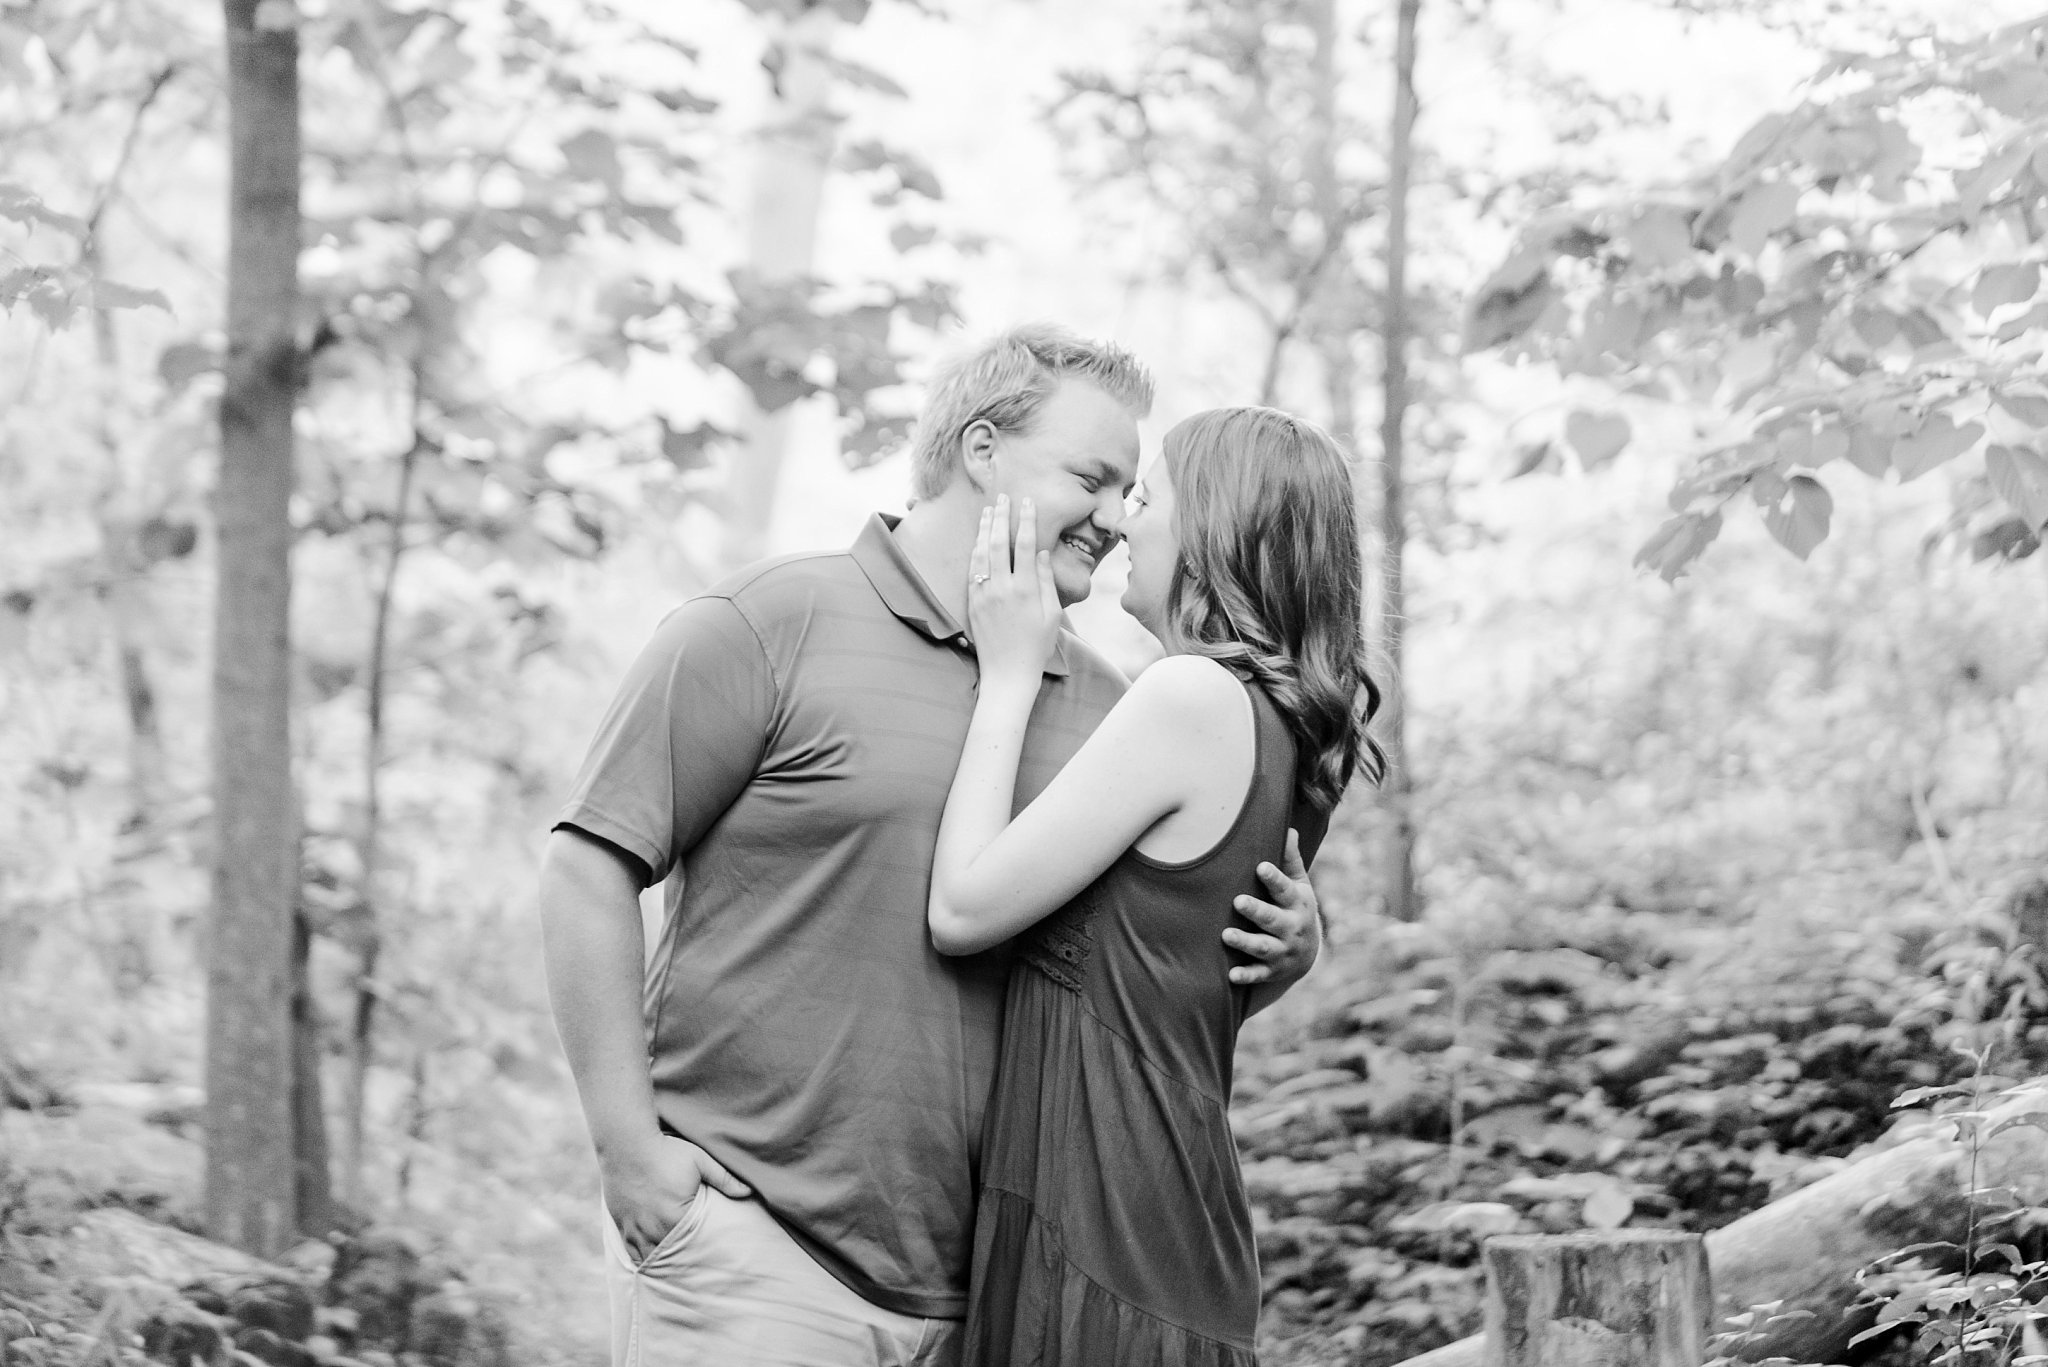 a black and white photo of a couple surrounded by trees. the man is wrapping his arms around the woman's wait, and she is reaching up to his jaw as they lean in for a kiss. wedding photographers in london ontario life is beautiful photography